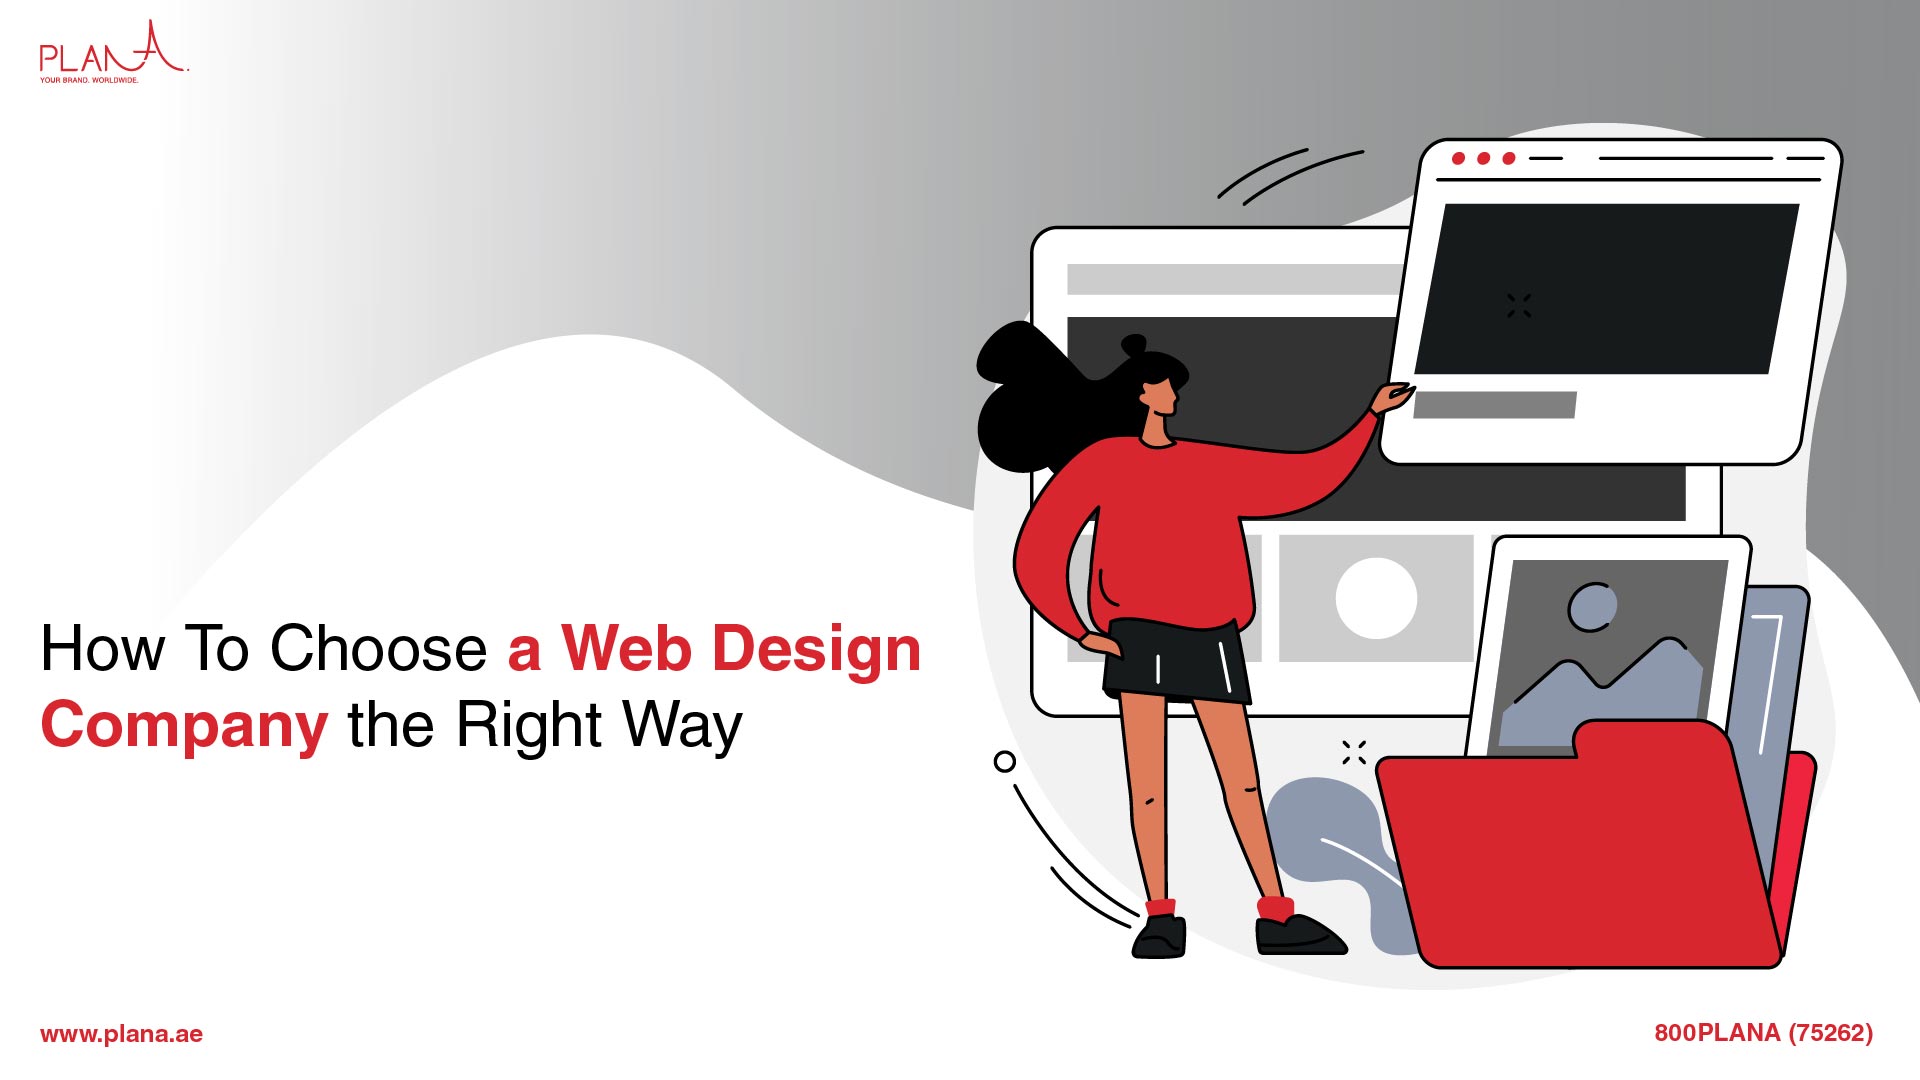 How to Choose a Web Design Company the Right Way